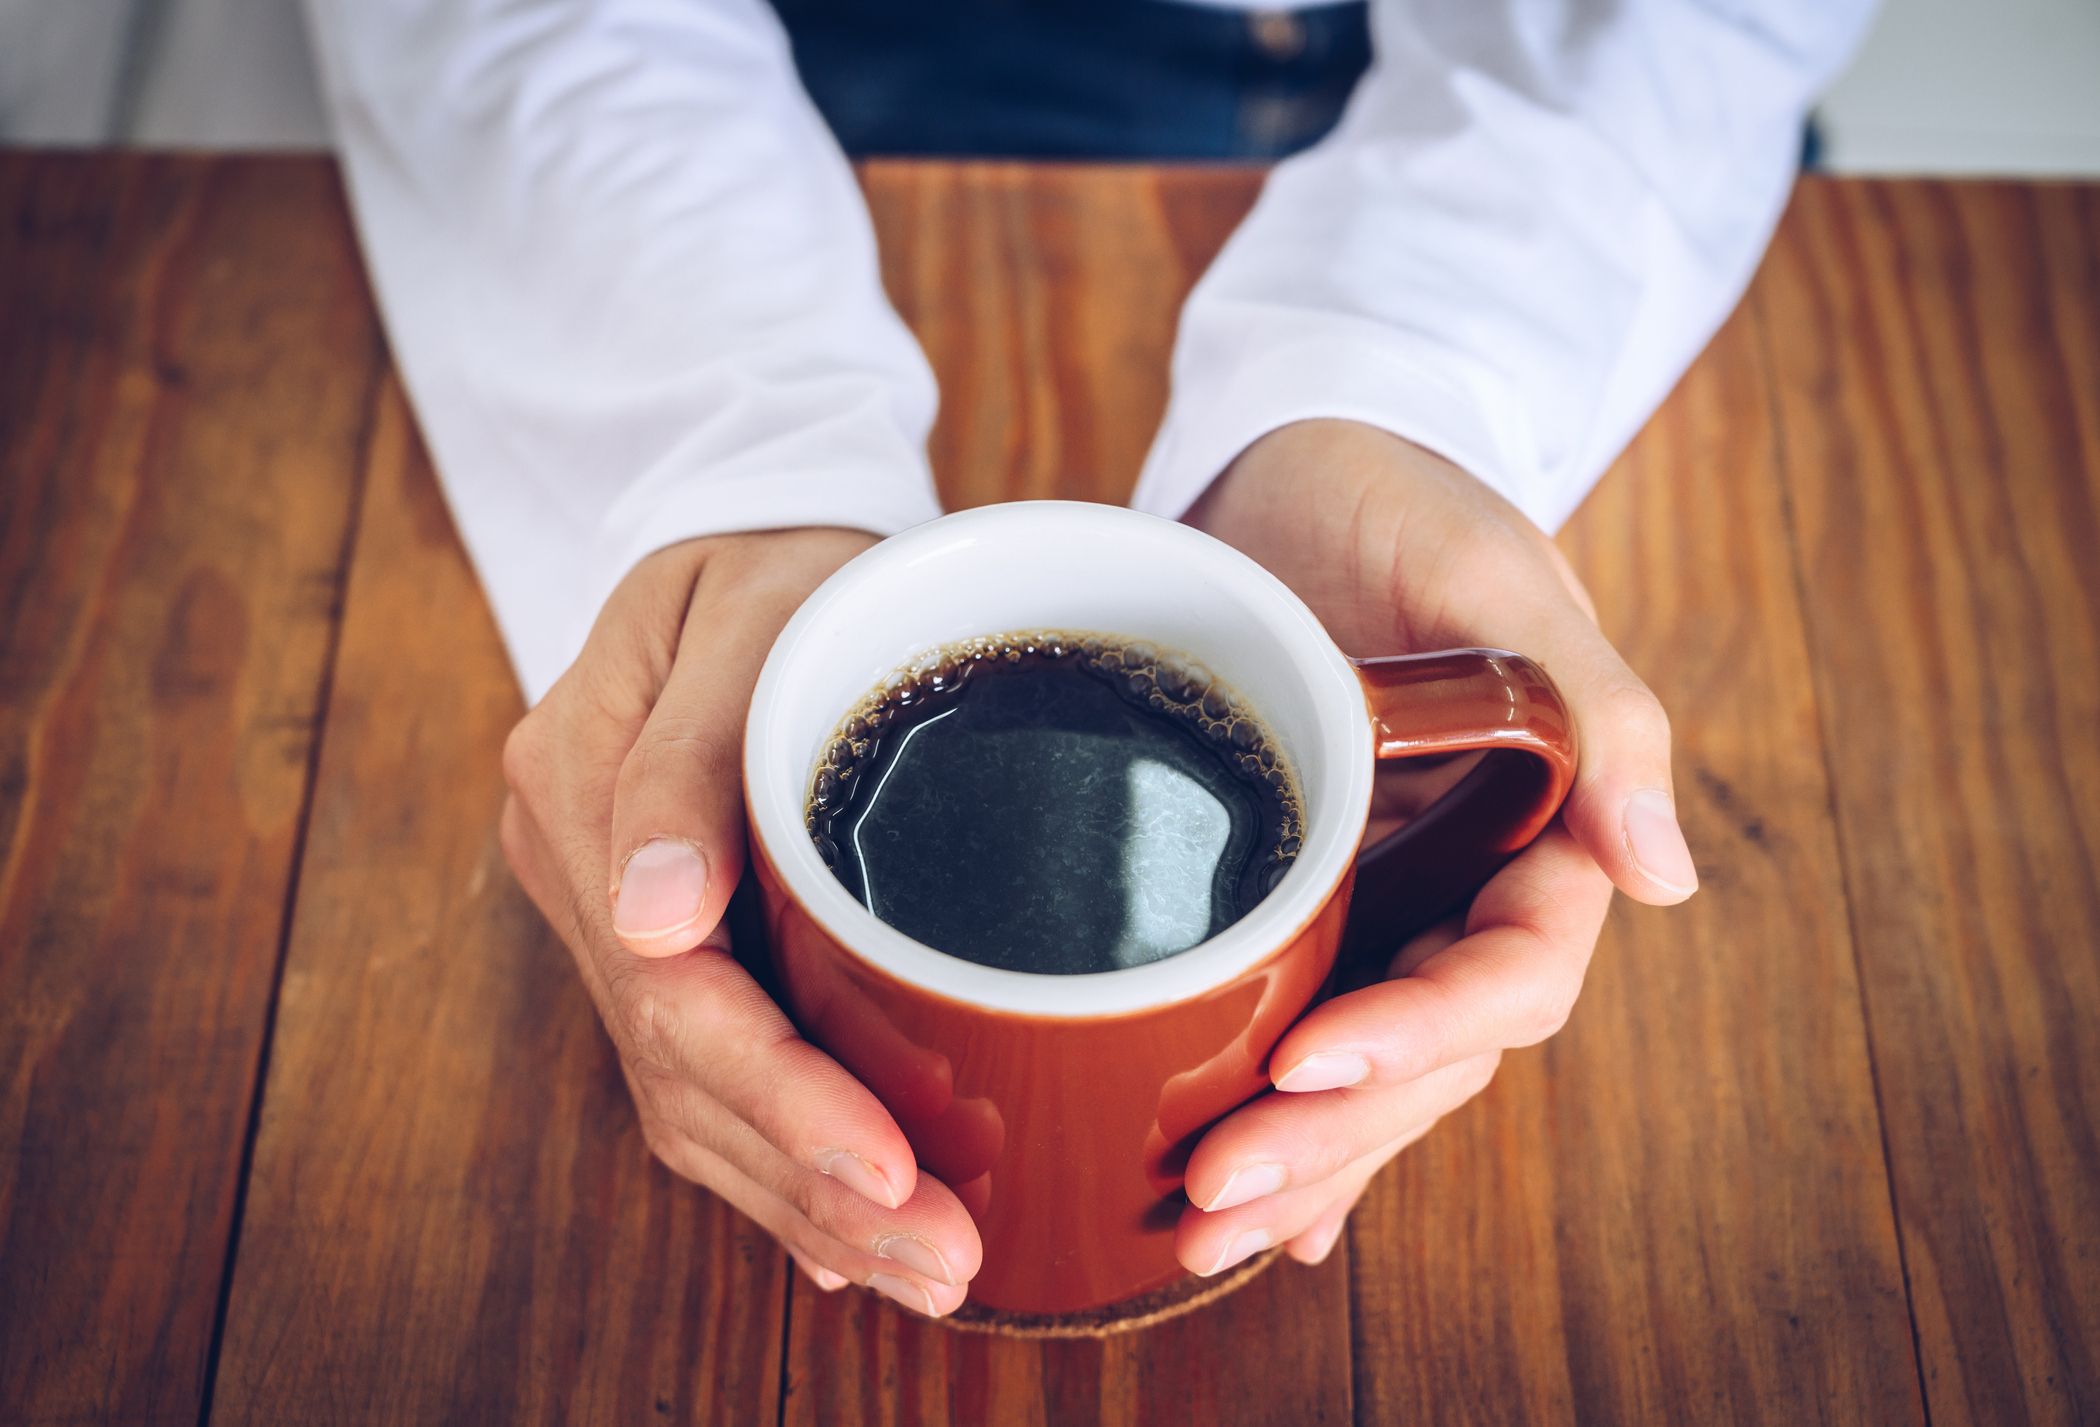 Why waking up to a cup of coffee could boost longevity?